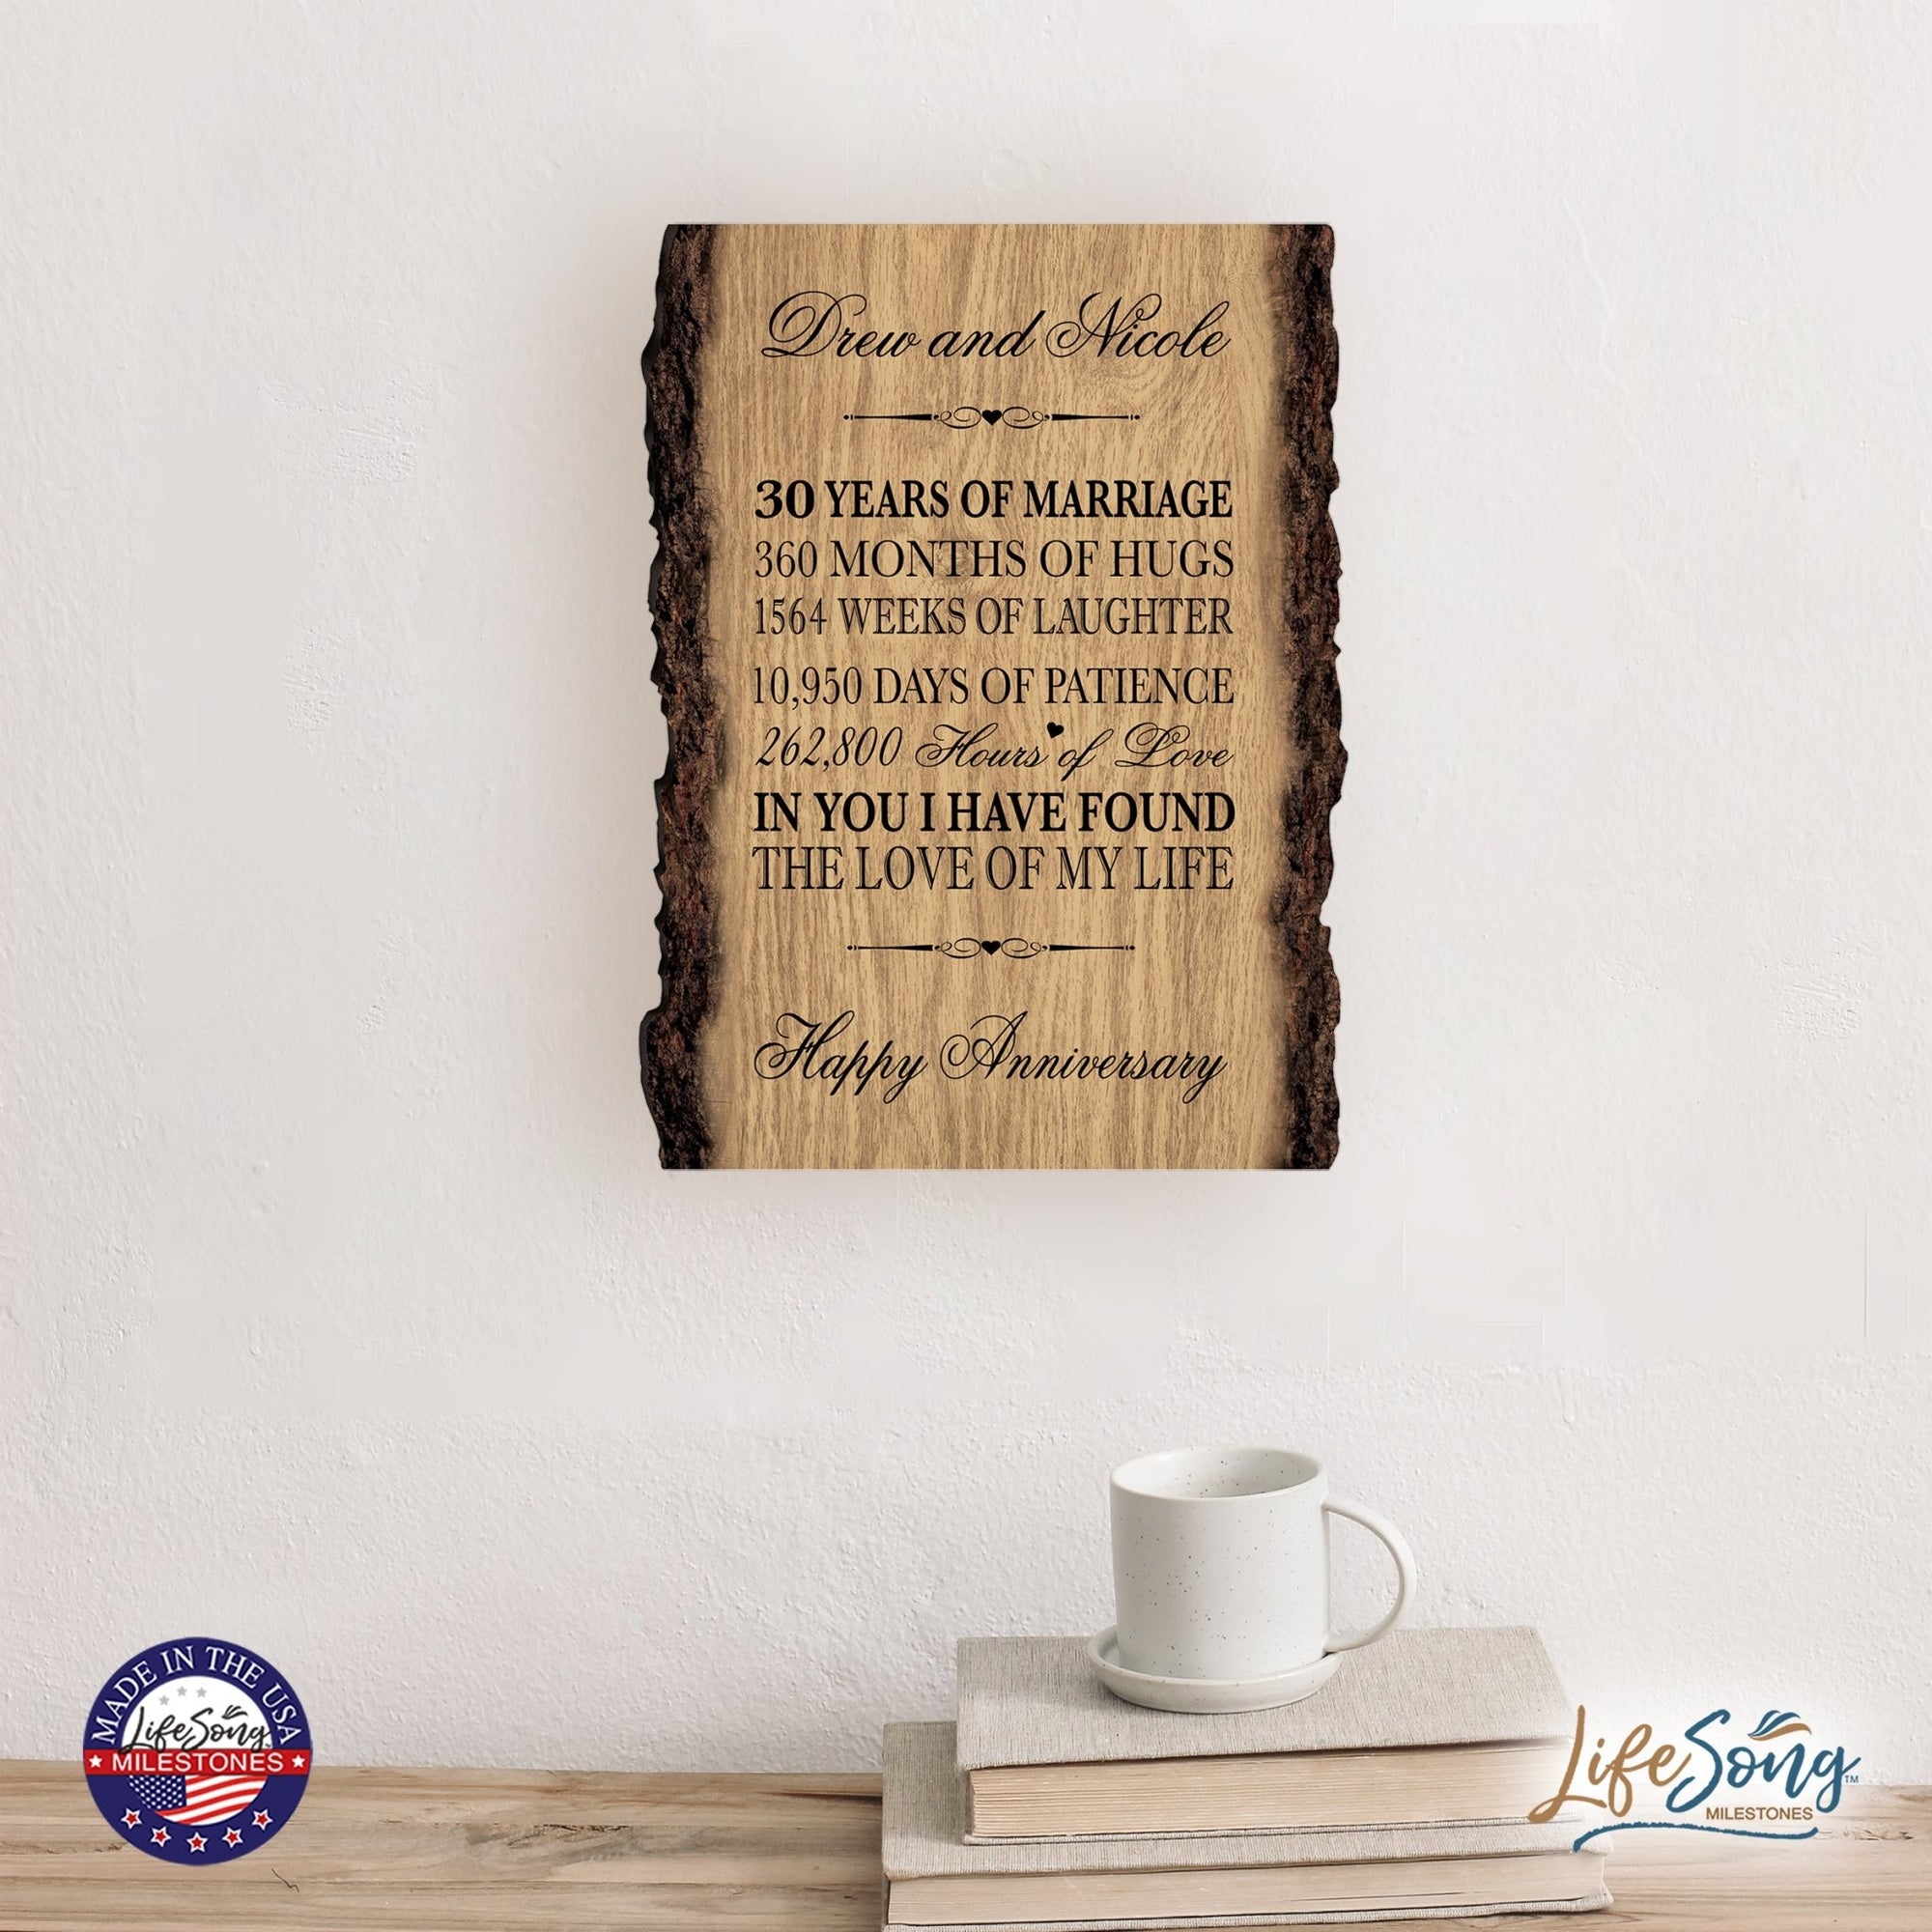 Personalized Rustic Wedding Anniversary 9x12 Barky Wall Plaque Gift For Parents, Grandparents New Couple - 30 Years Of Marriage - LifeSong Milestones